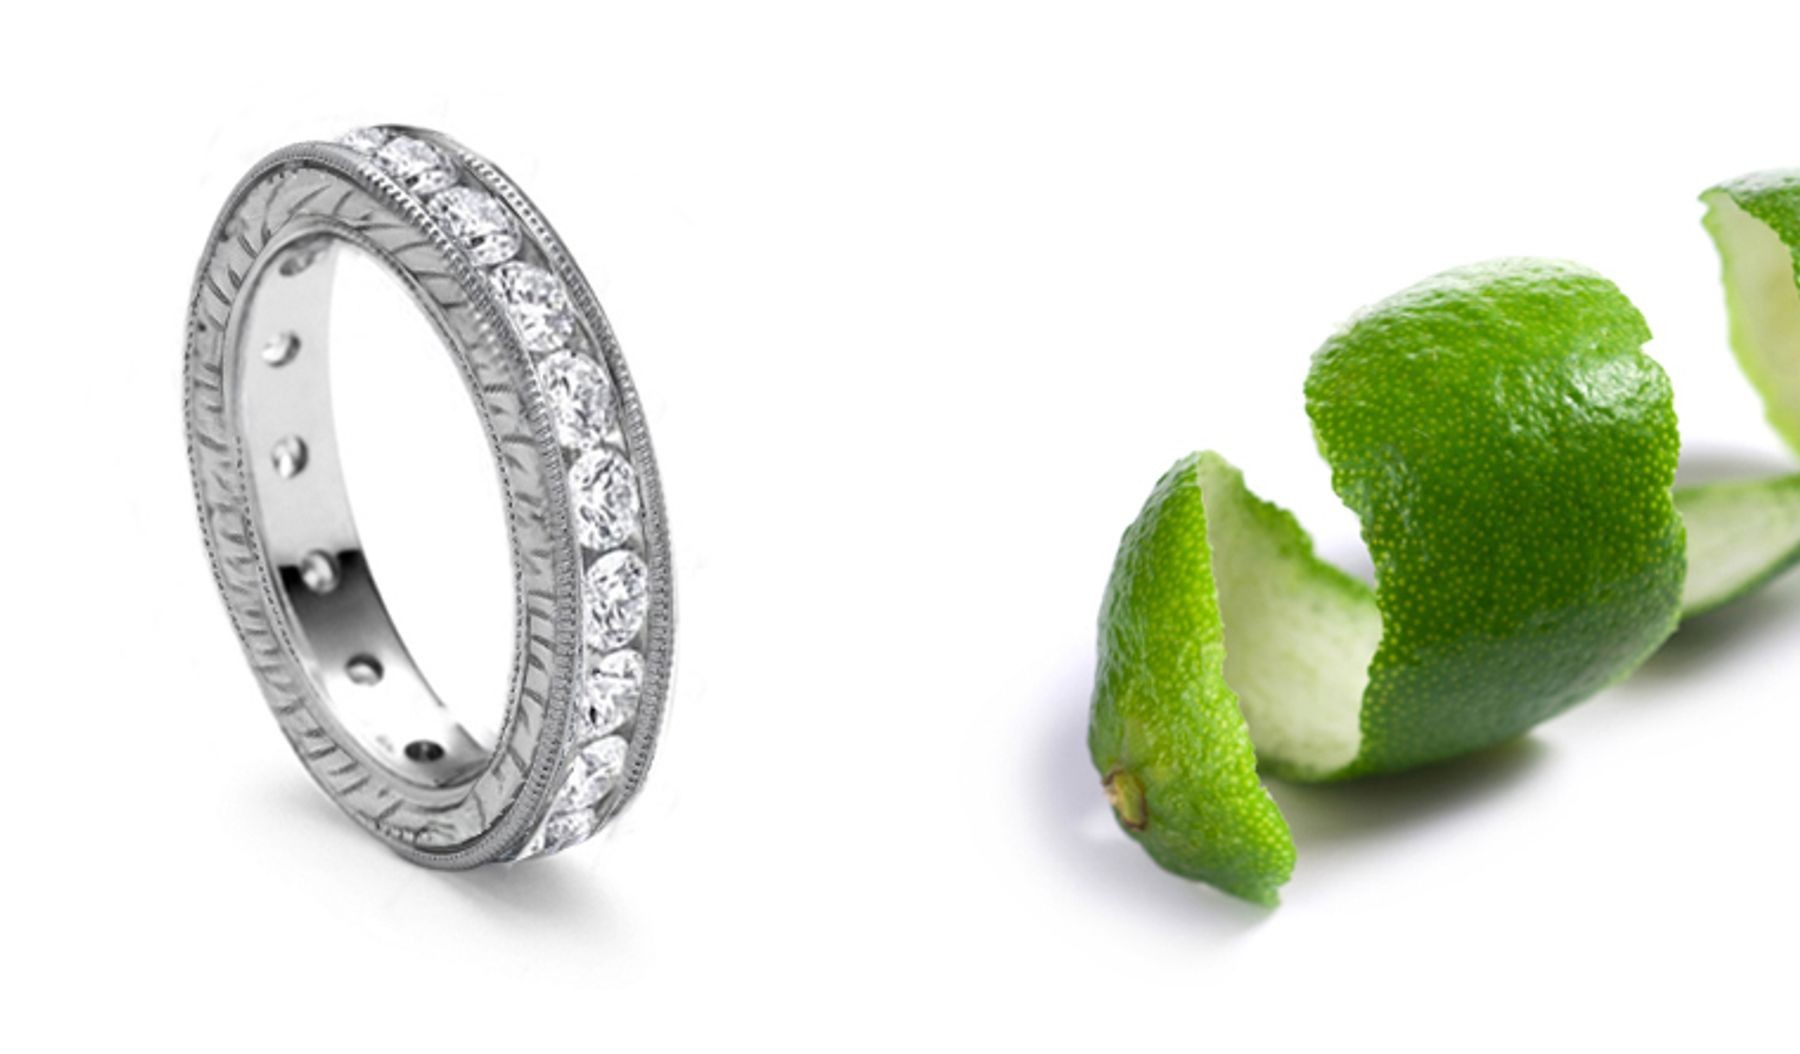 'Must Have': A Seamless Circle of Well-Cut Round Diamonds With Milgrain & Hand Engraved Details on Sides in Size 3 to 8